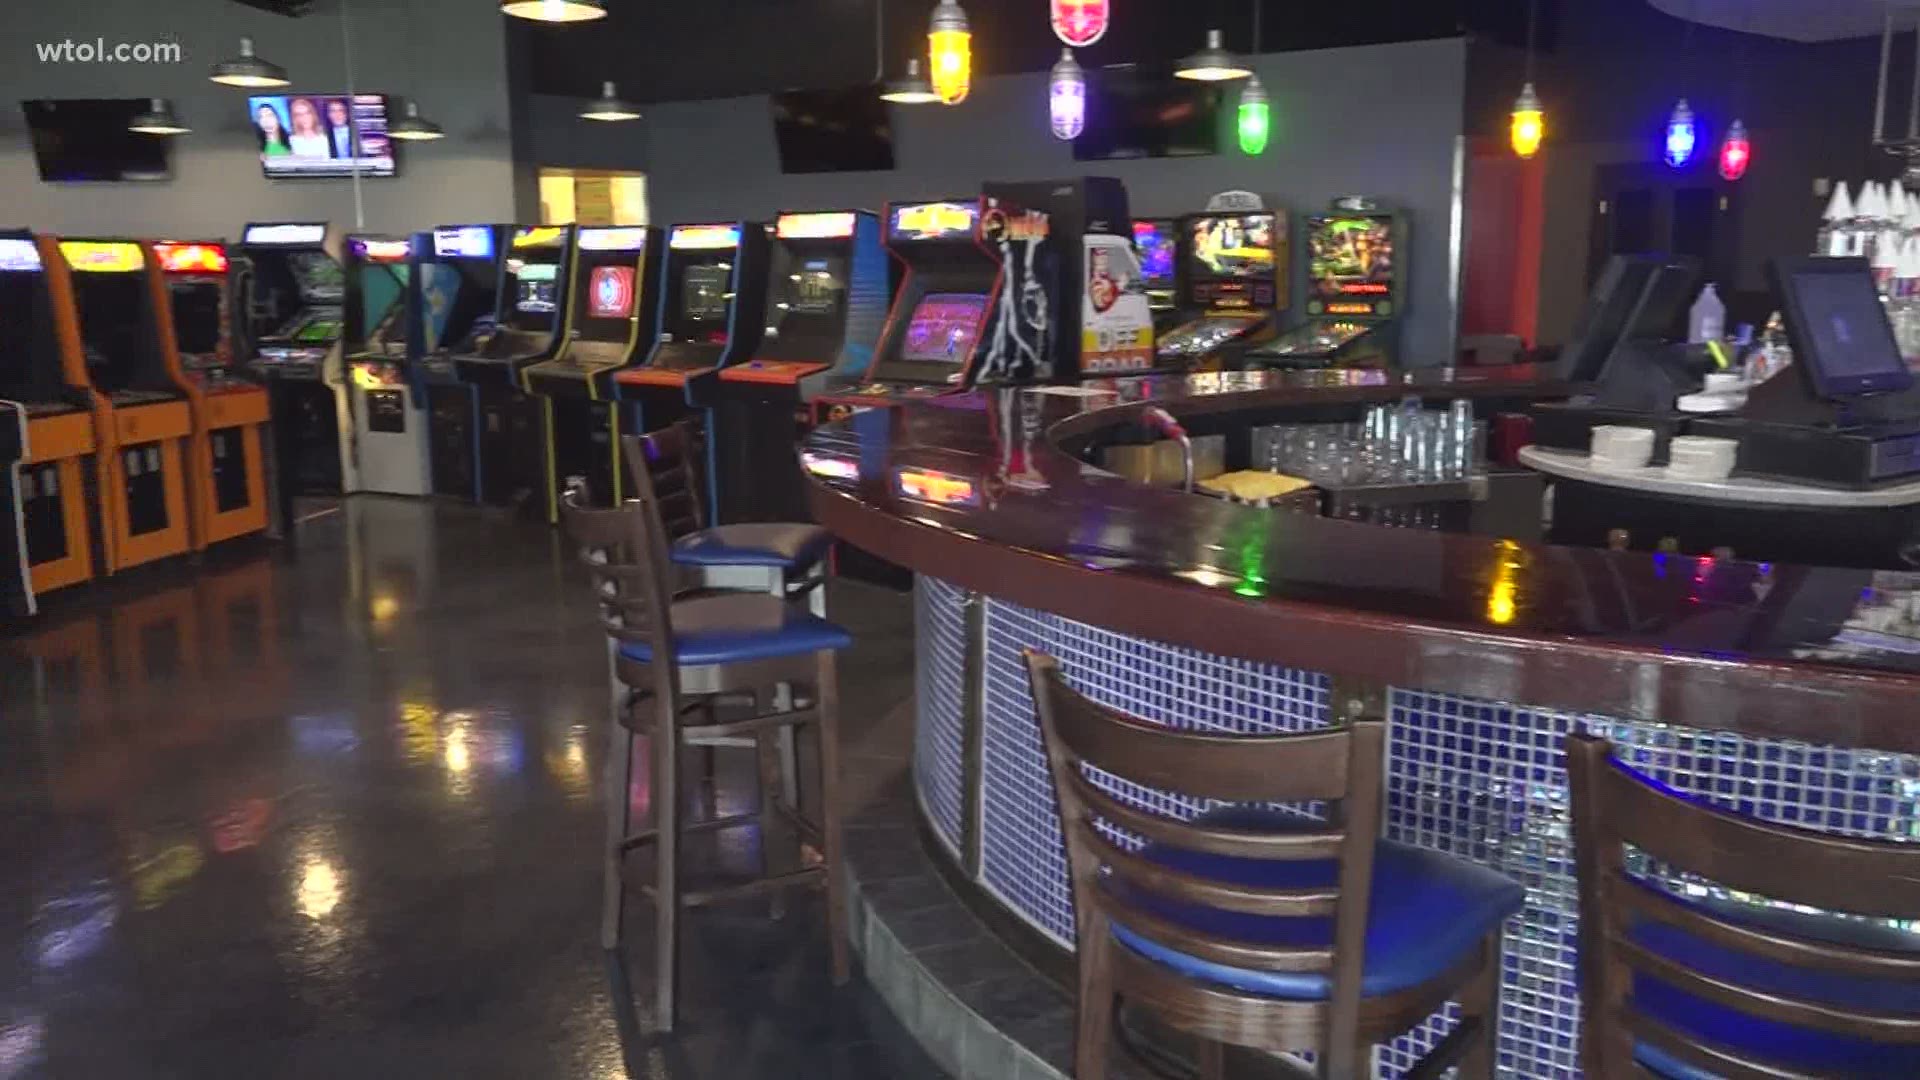 The former site of Fat Fish Blue at Levis Commons now offers an old school video game experience along with an updated menu and drink selection.